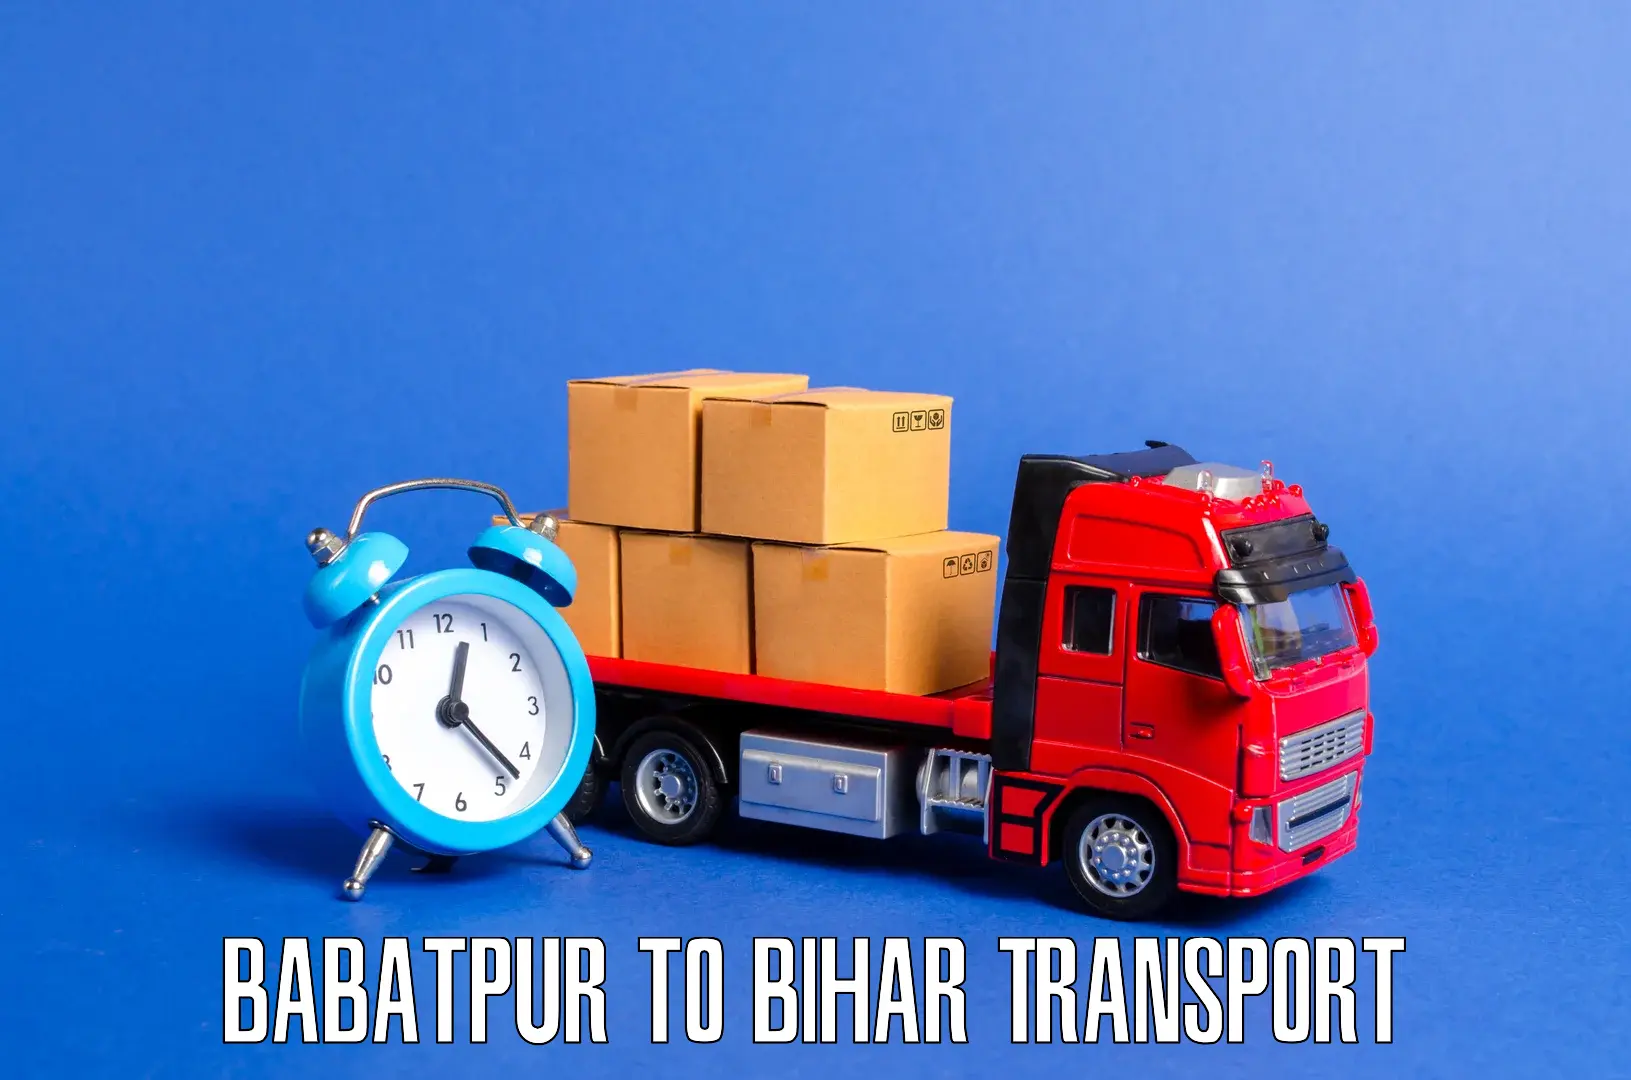 Container transport service Babatpur to Patna